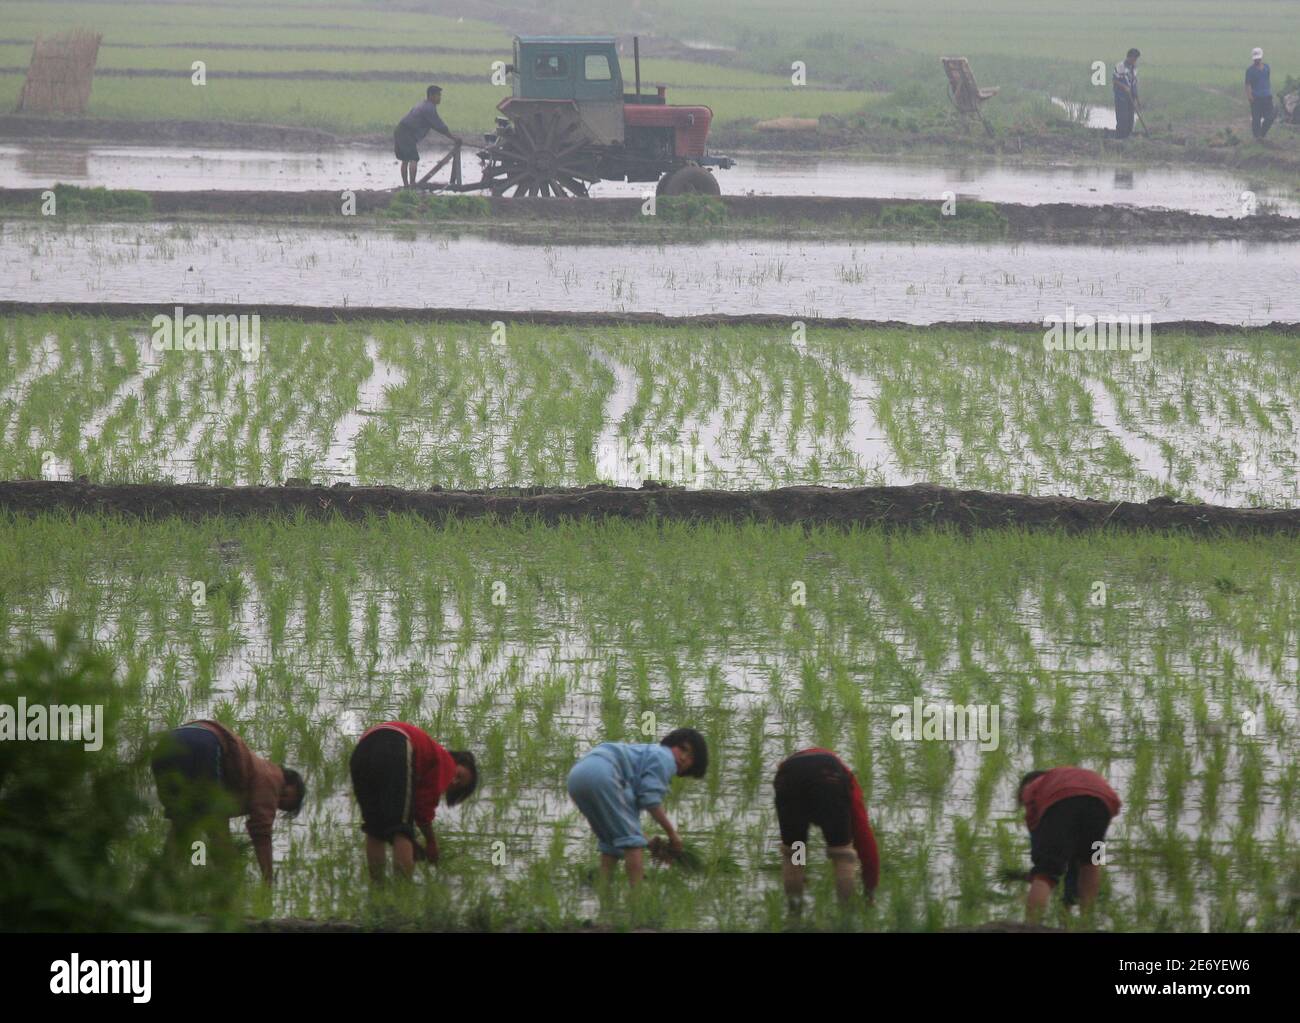 North Koreans work on a farm near the banks of the Yalu River near the North Korean town of Sinuiju, opposite the Chinese border city of Dandong, June 17, 2010. The world must send a strong message to North Korea that its provocative actions are unacceptable, a senior U.S. diplomat said on Thursday after talks on how to respond to the sinking of a South Korean warship. South Korea wants the U.N. Security Council to rebuke the North in a resolution imposing tough sanctions over the sinking of its navy corvette Cheonan in March, killing 46 sailors. REUTERS/Stringer (NORTH KOREA - Tags: AGRICULTU Stock Photo